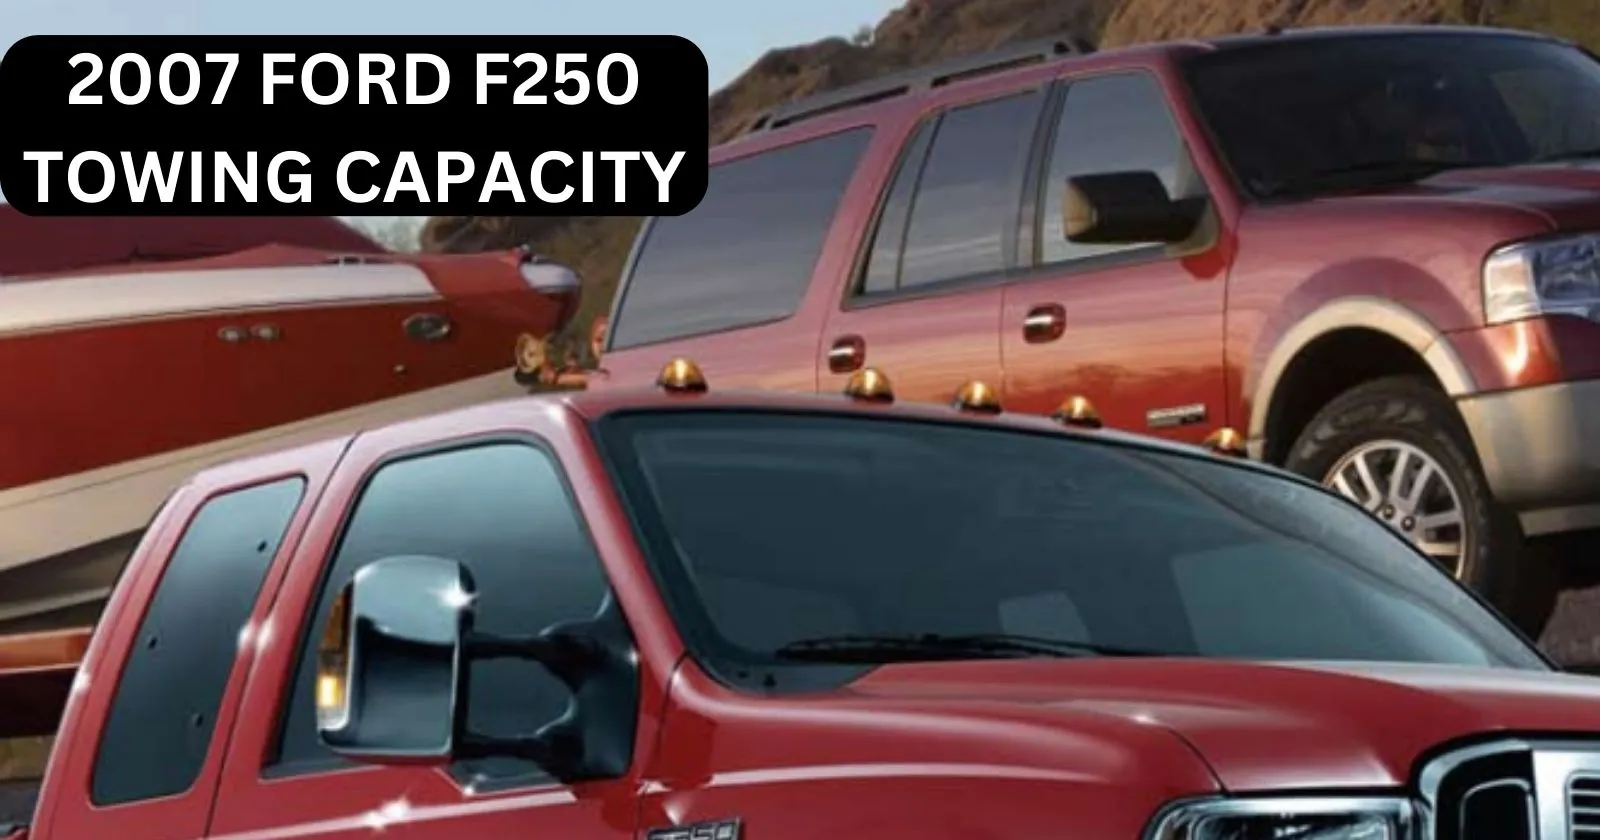 Explore the 2007 Ford F250 Towing Capacity with Charts & Guidelines